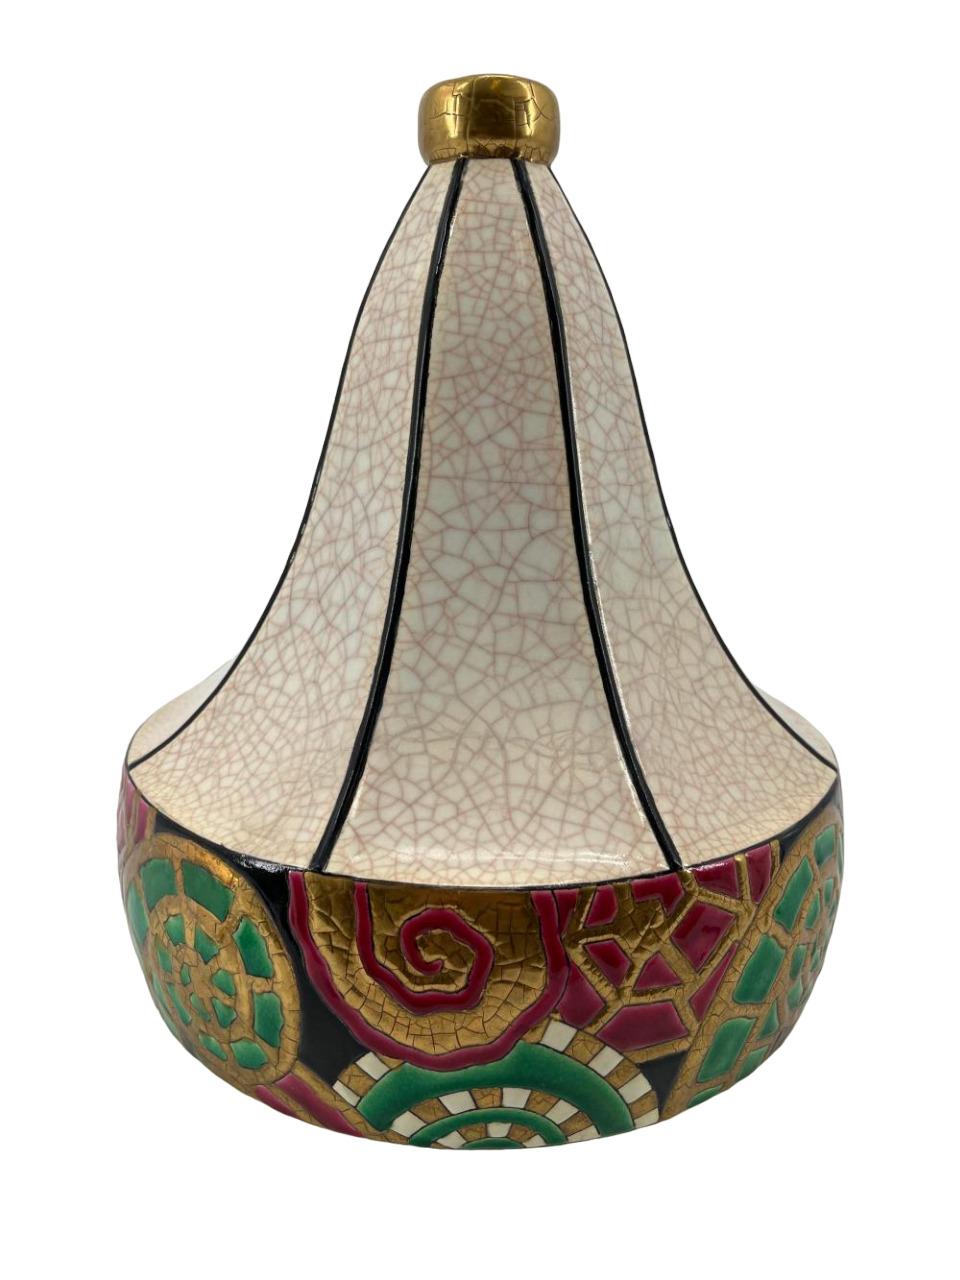 A large Art Déco ceramic vase of polygonal gourd form decorated with a cream craquelure glaze and brightly coloured enamels with a 'cloisonné' freize of stylised fern fronds. Printed backstamp 'Longwy, Société Des Faïenceries, France'. D5025
French,